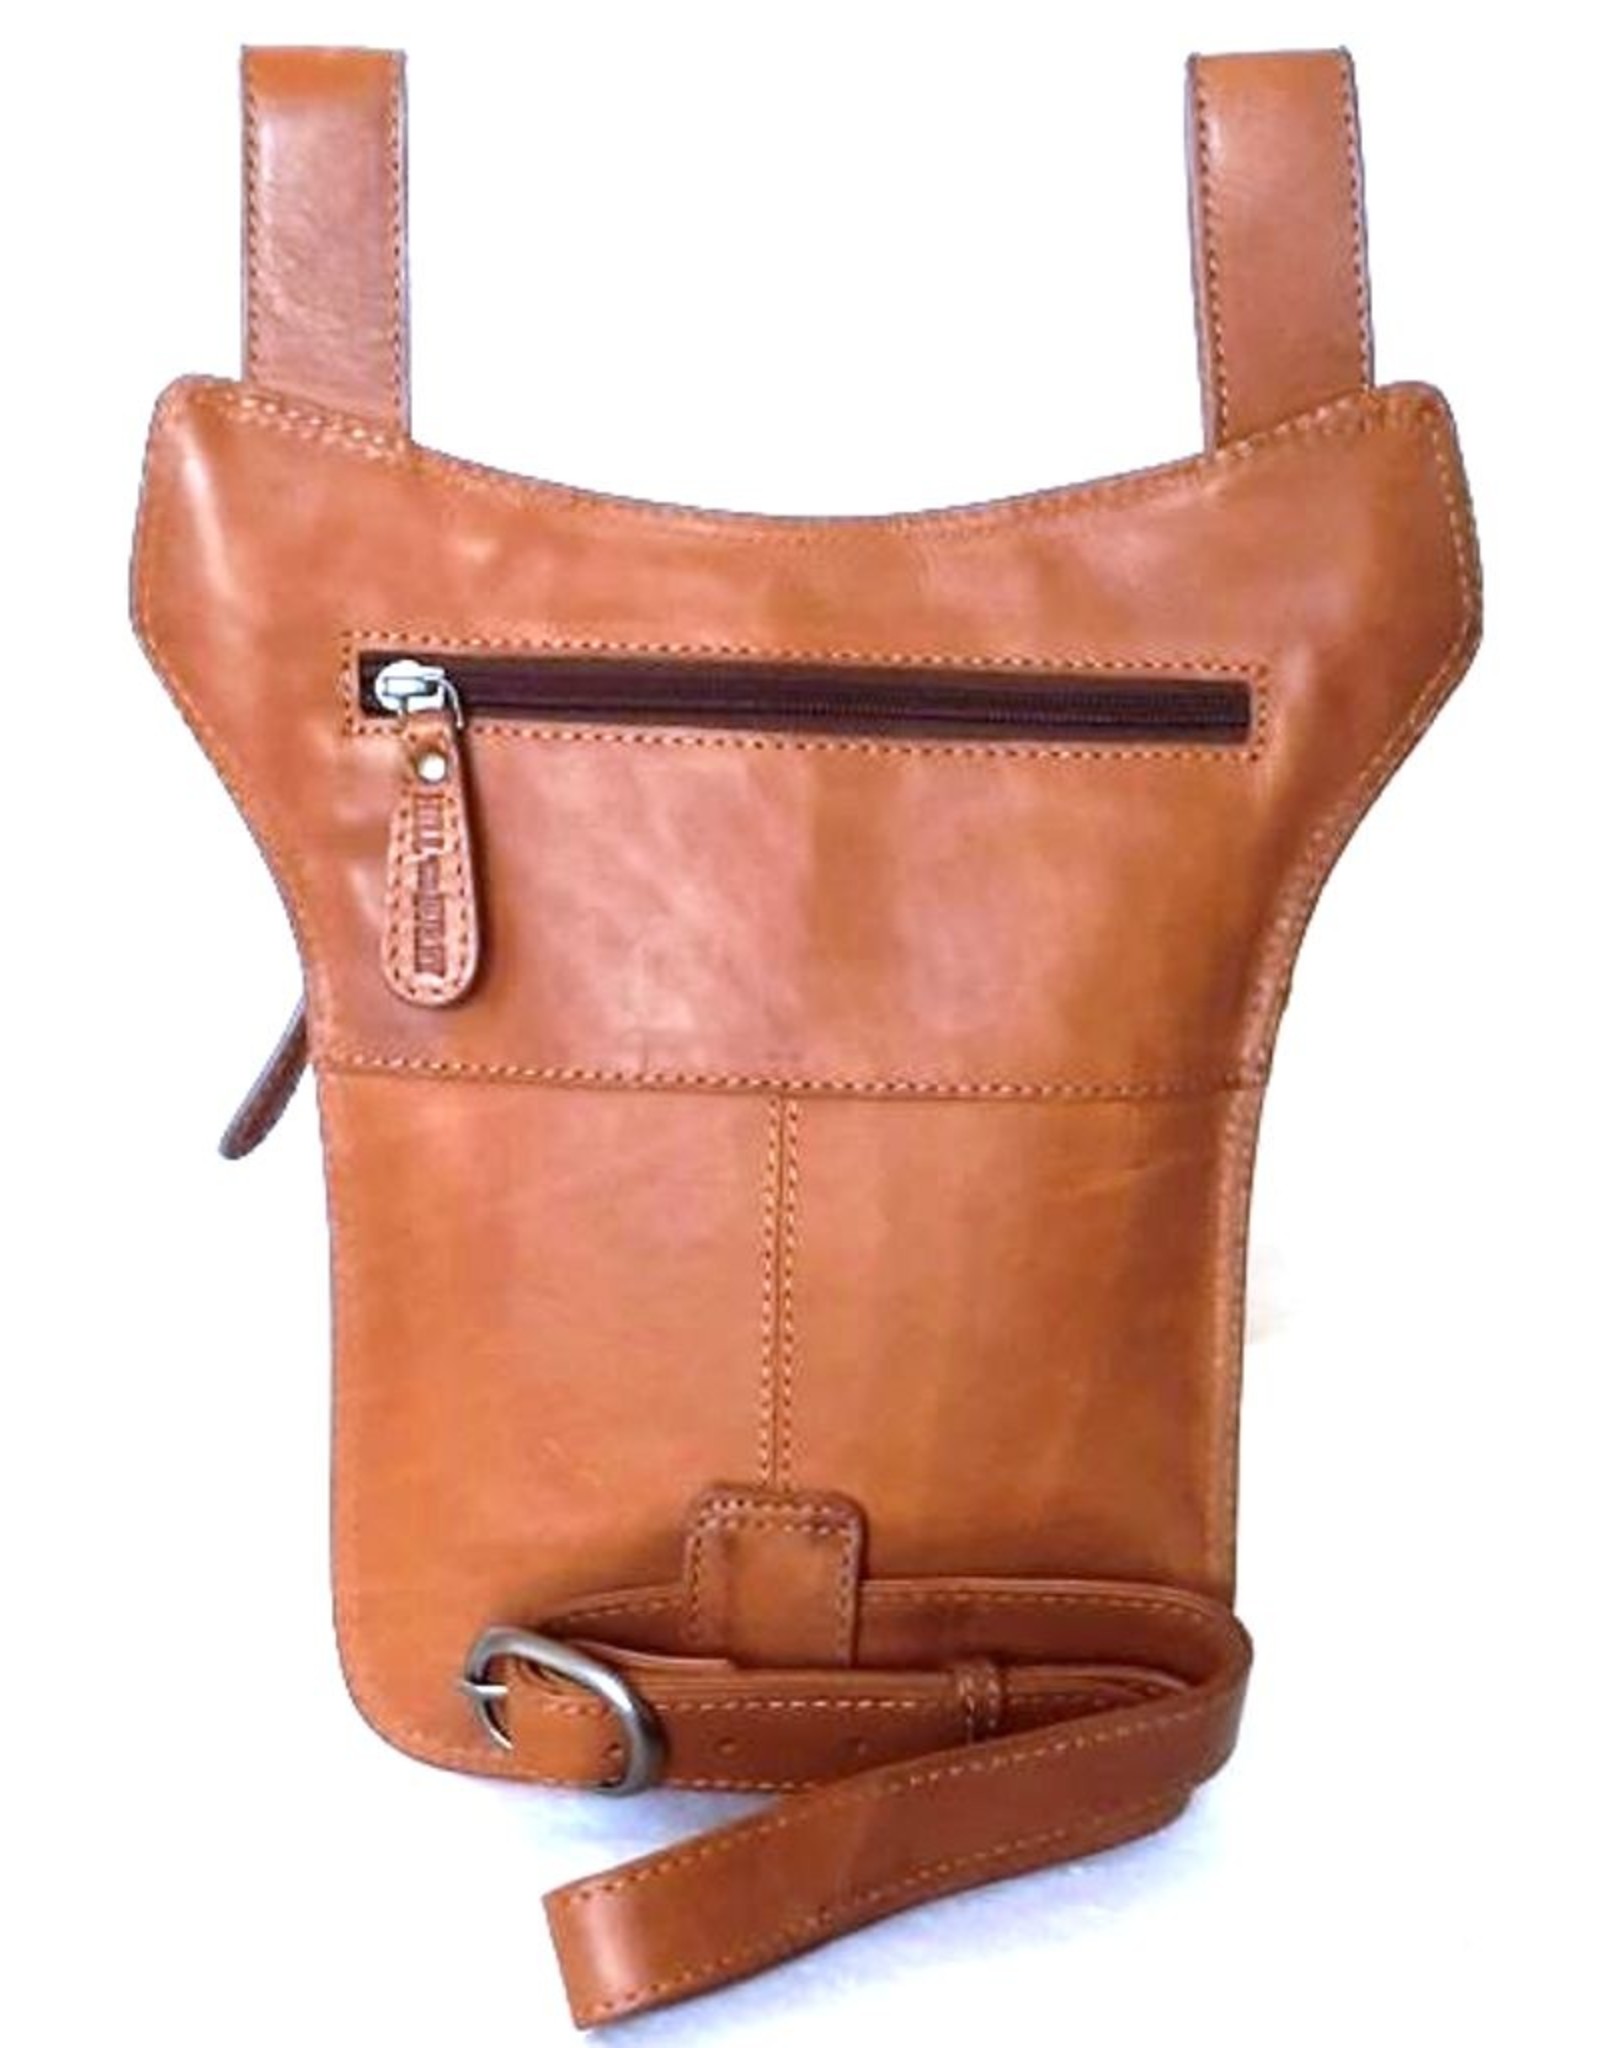 HillBurry Leather Festival bags, waist bags and belt bags - Hillburry belt bag - leg bag oiled leather brown